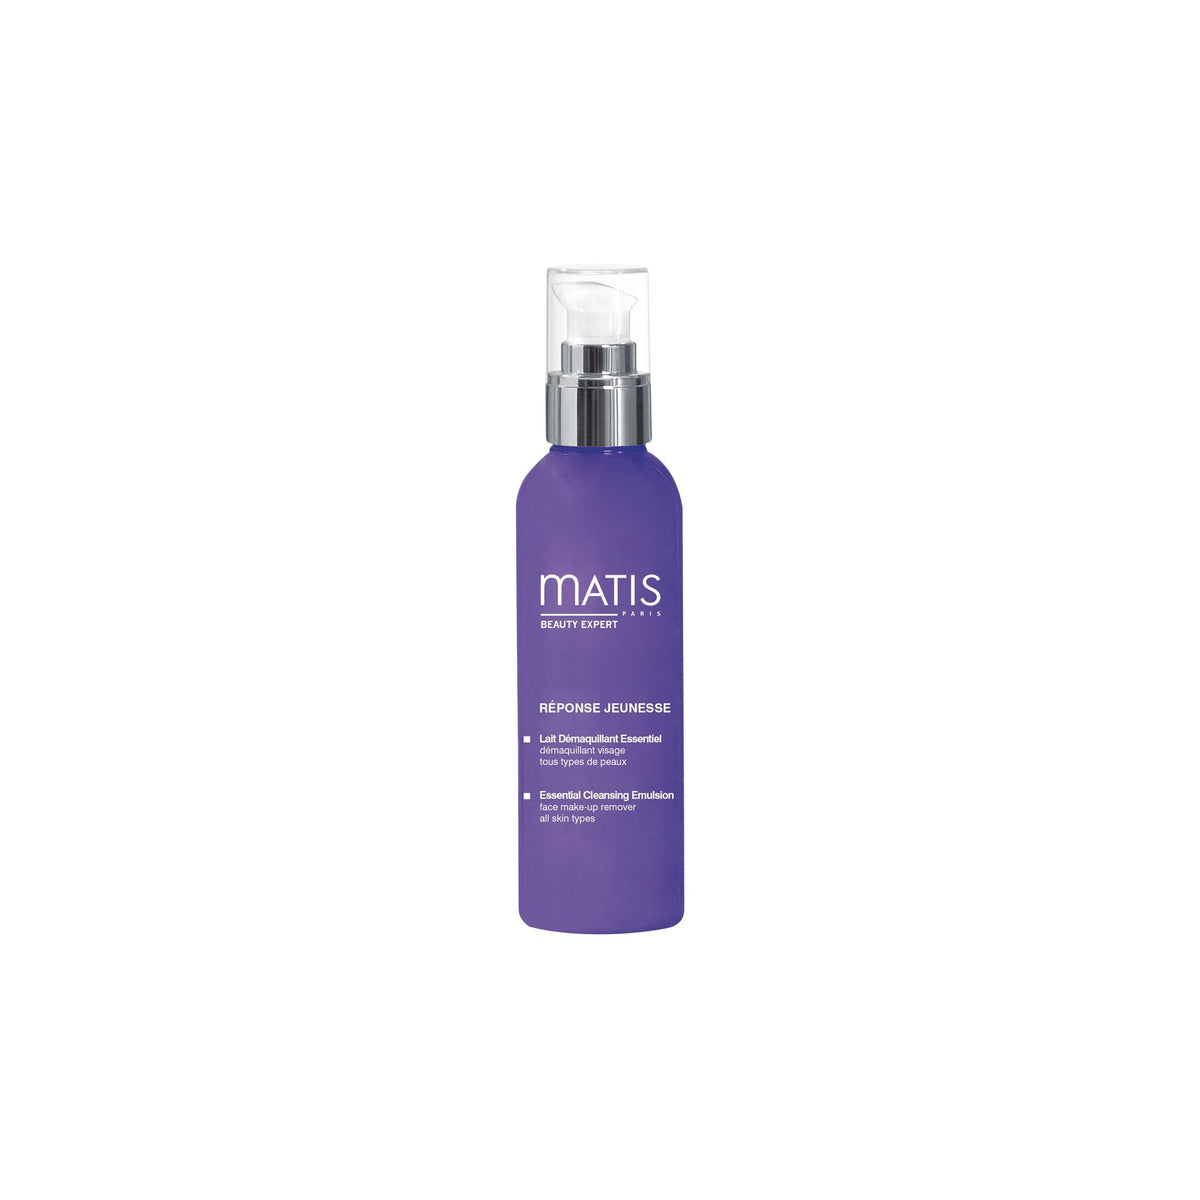 Matis Youth Response Essential Cleansing Emulsion 200ml